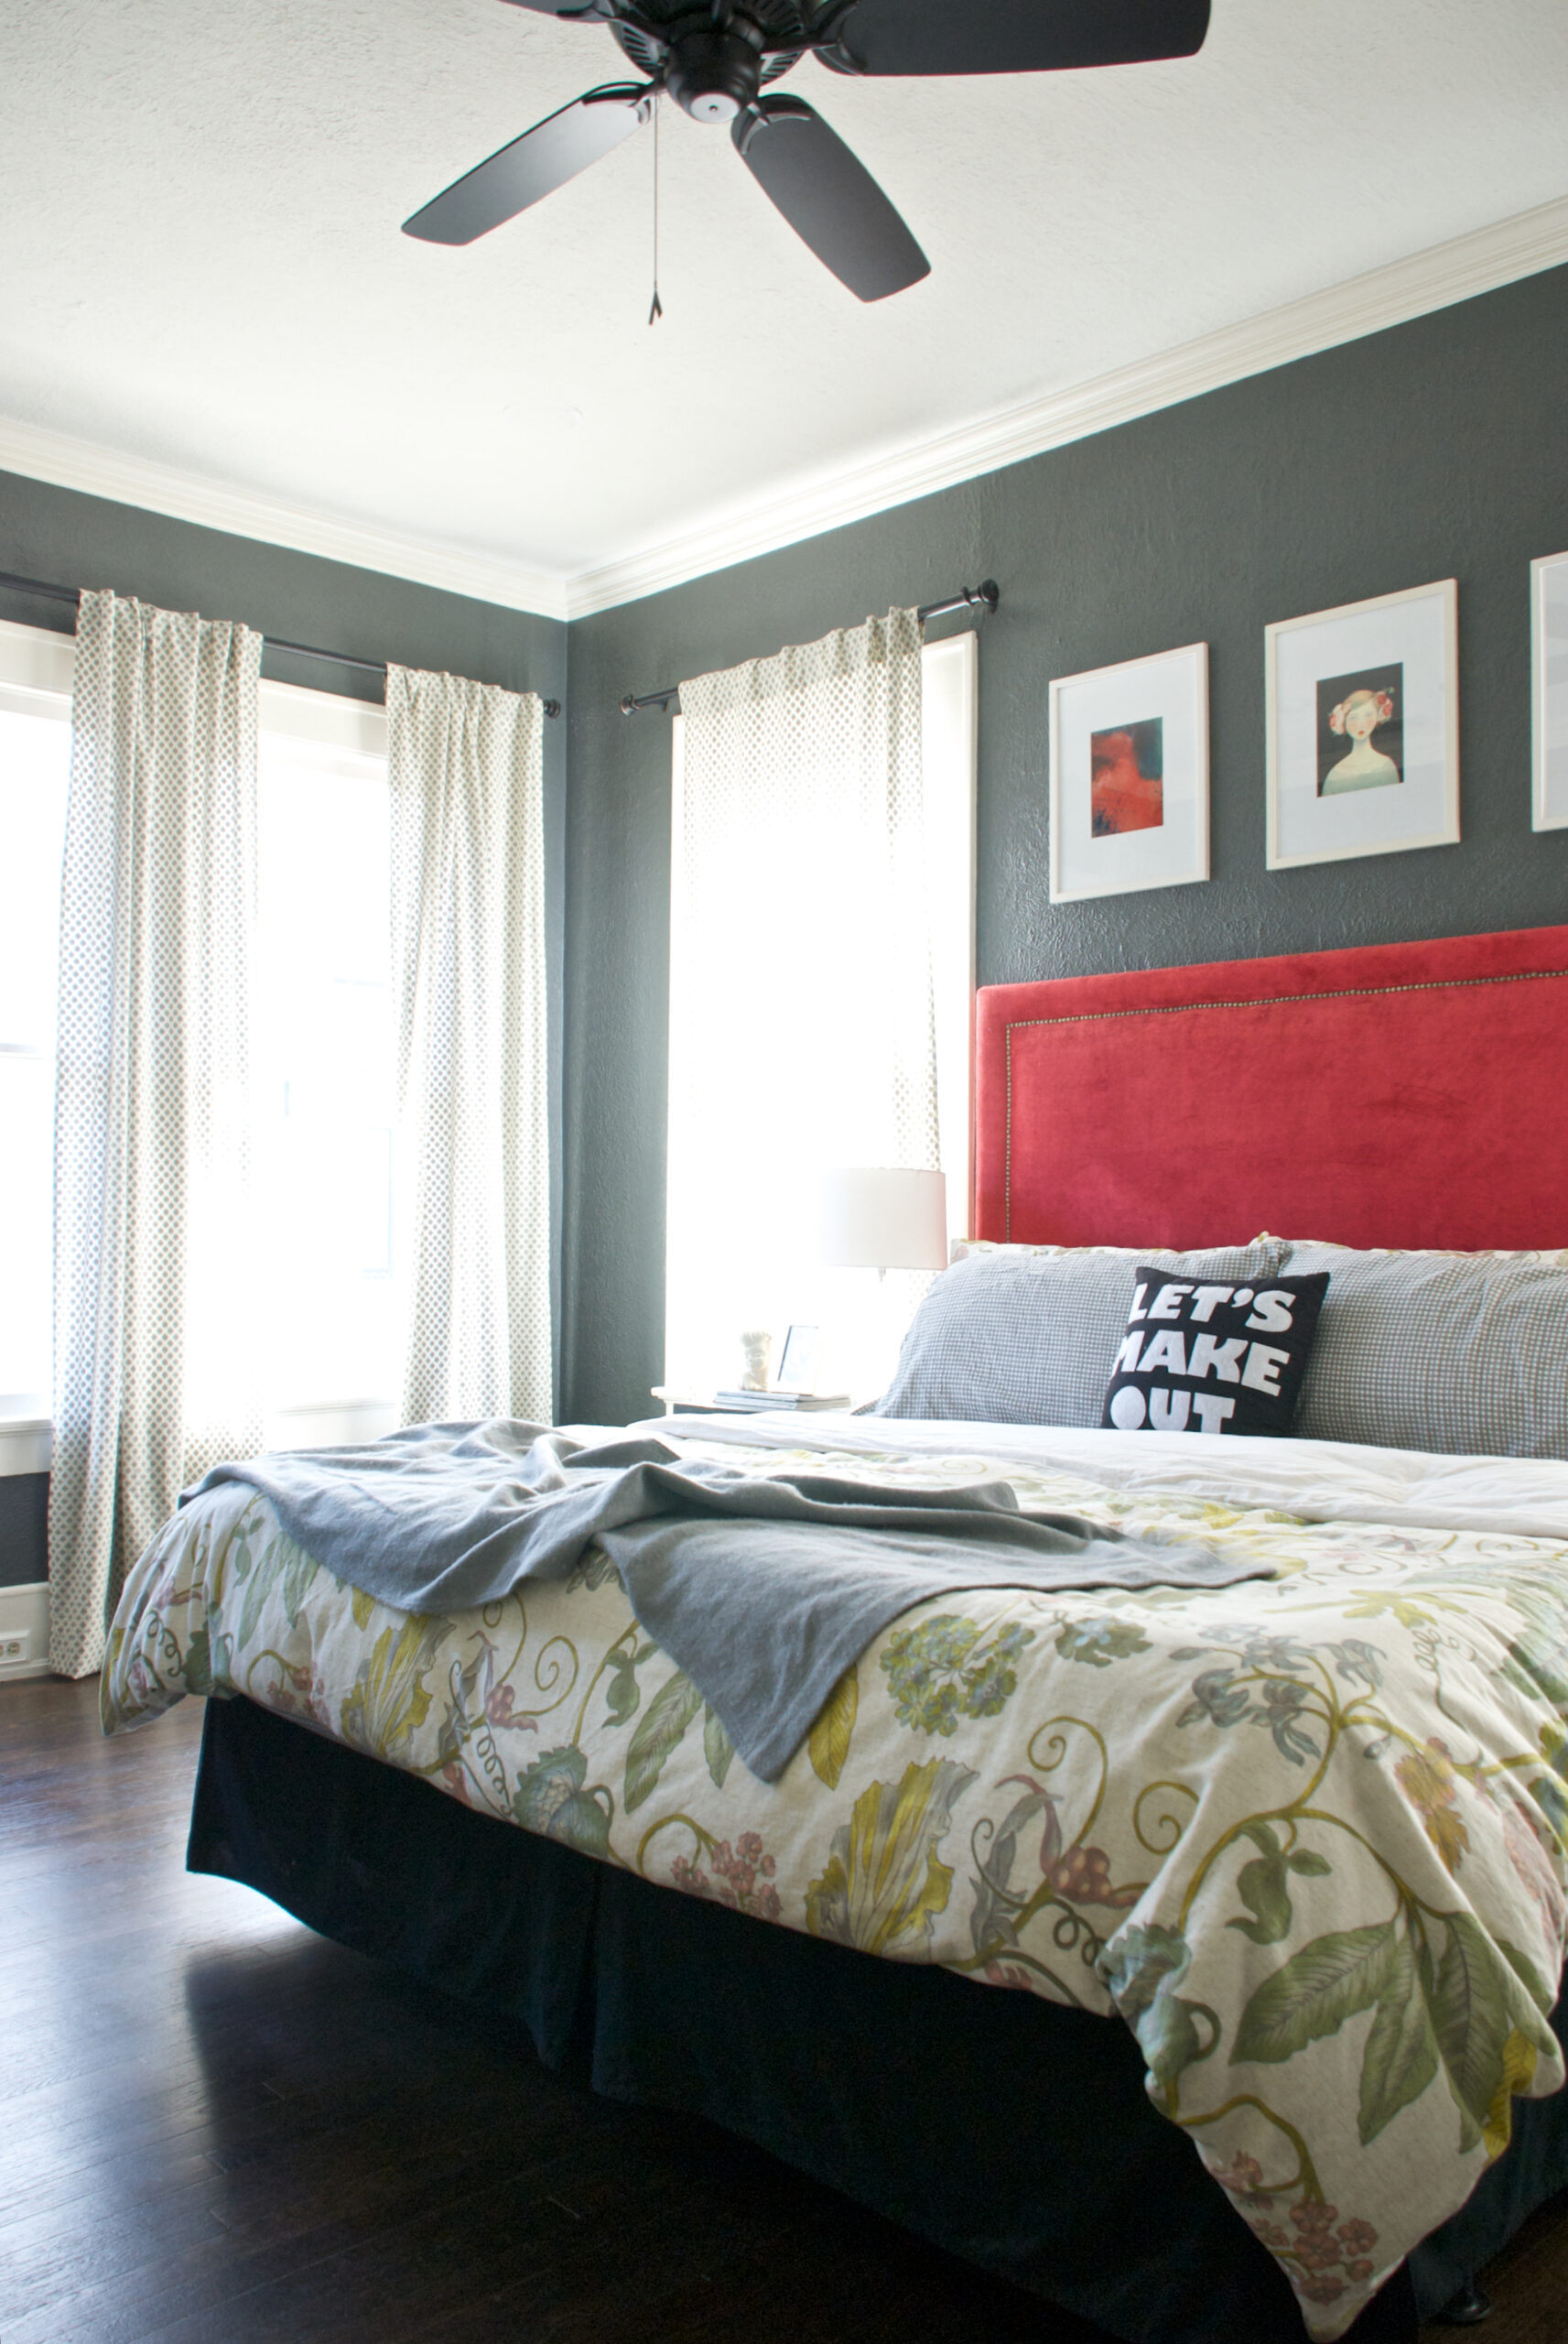 How To: Upholstered Headboards